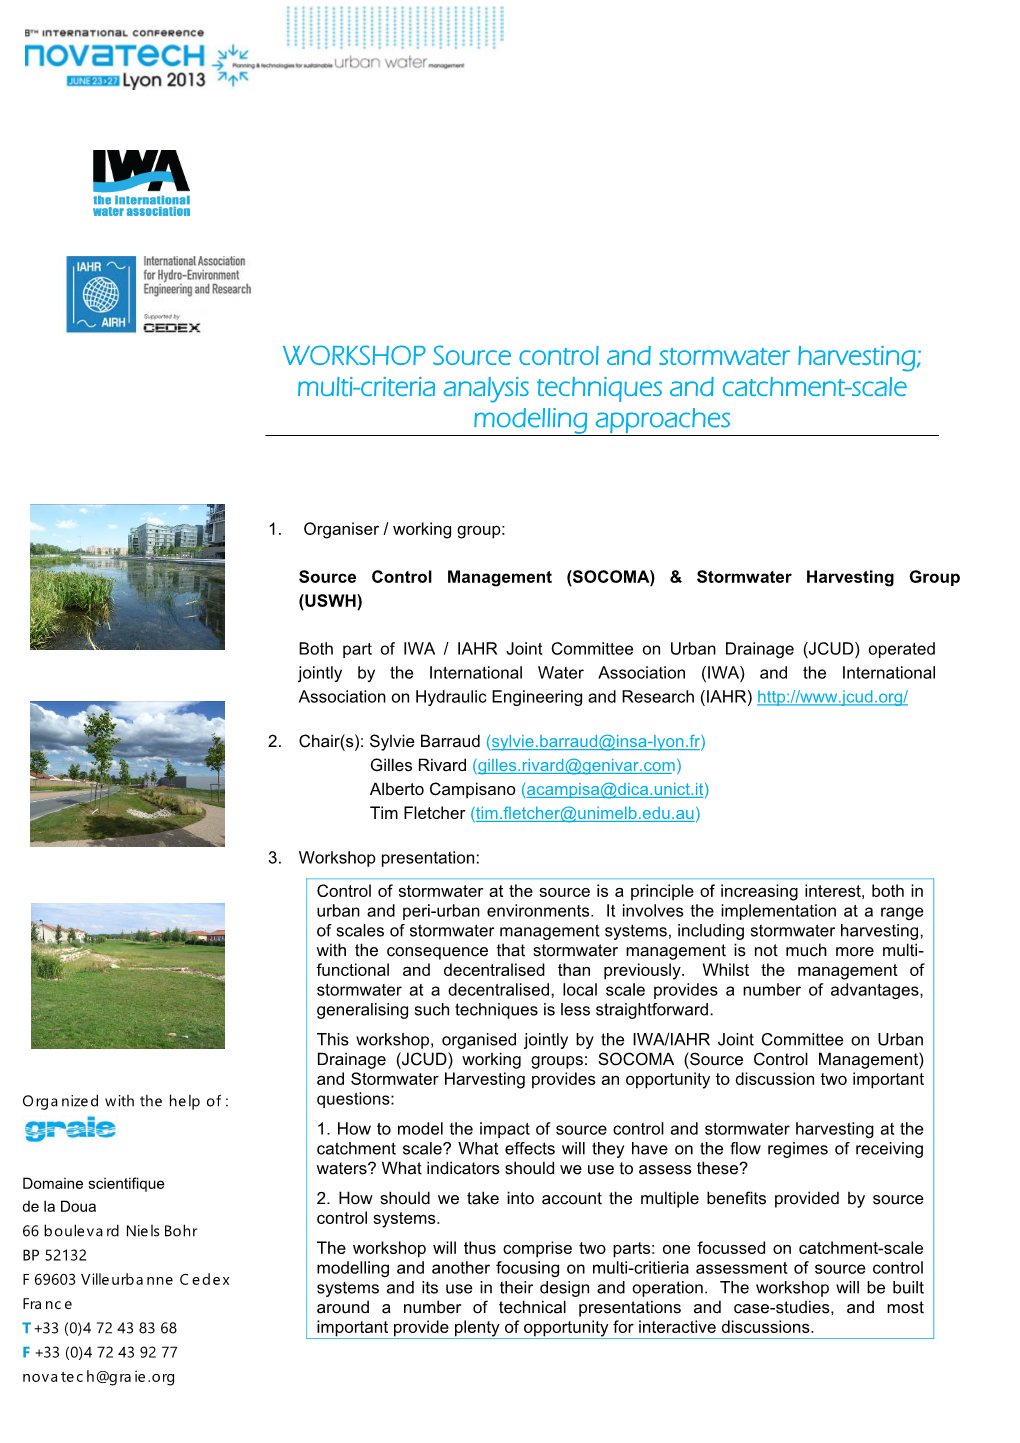 WORKSHOP Source Control and Stormwater Harvesting; Multi-Criteria Analysis Techniques and Catchment-Scale Modelling Approaches